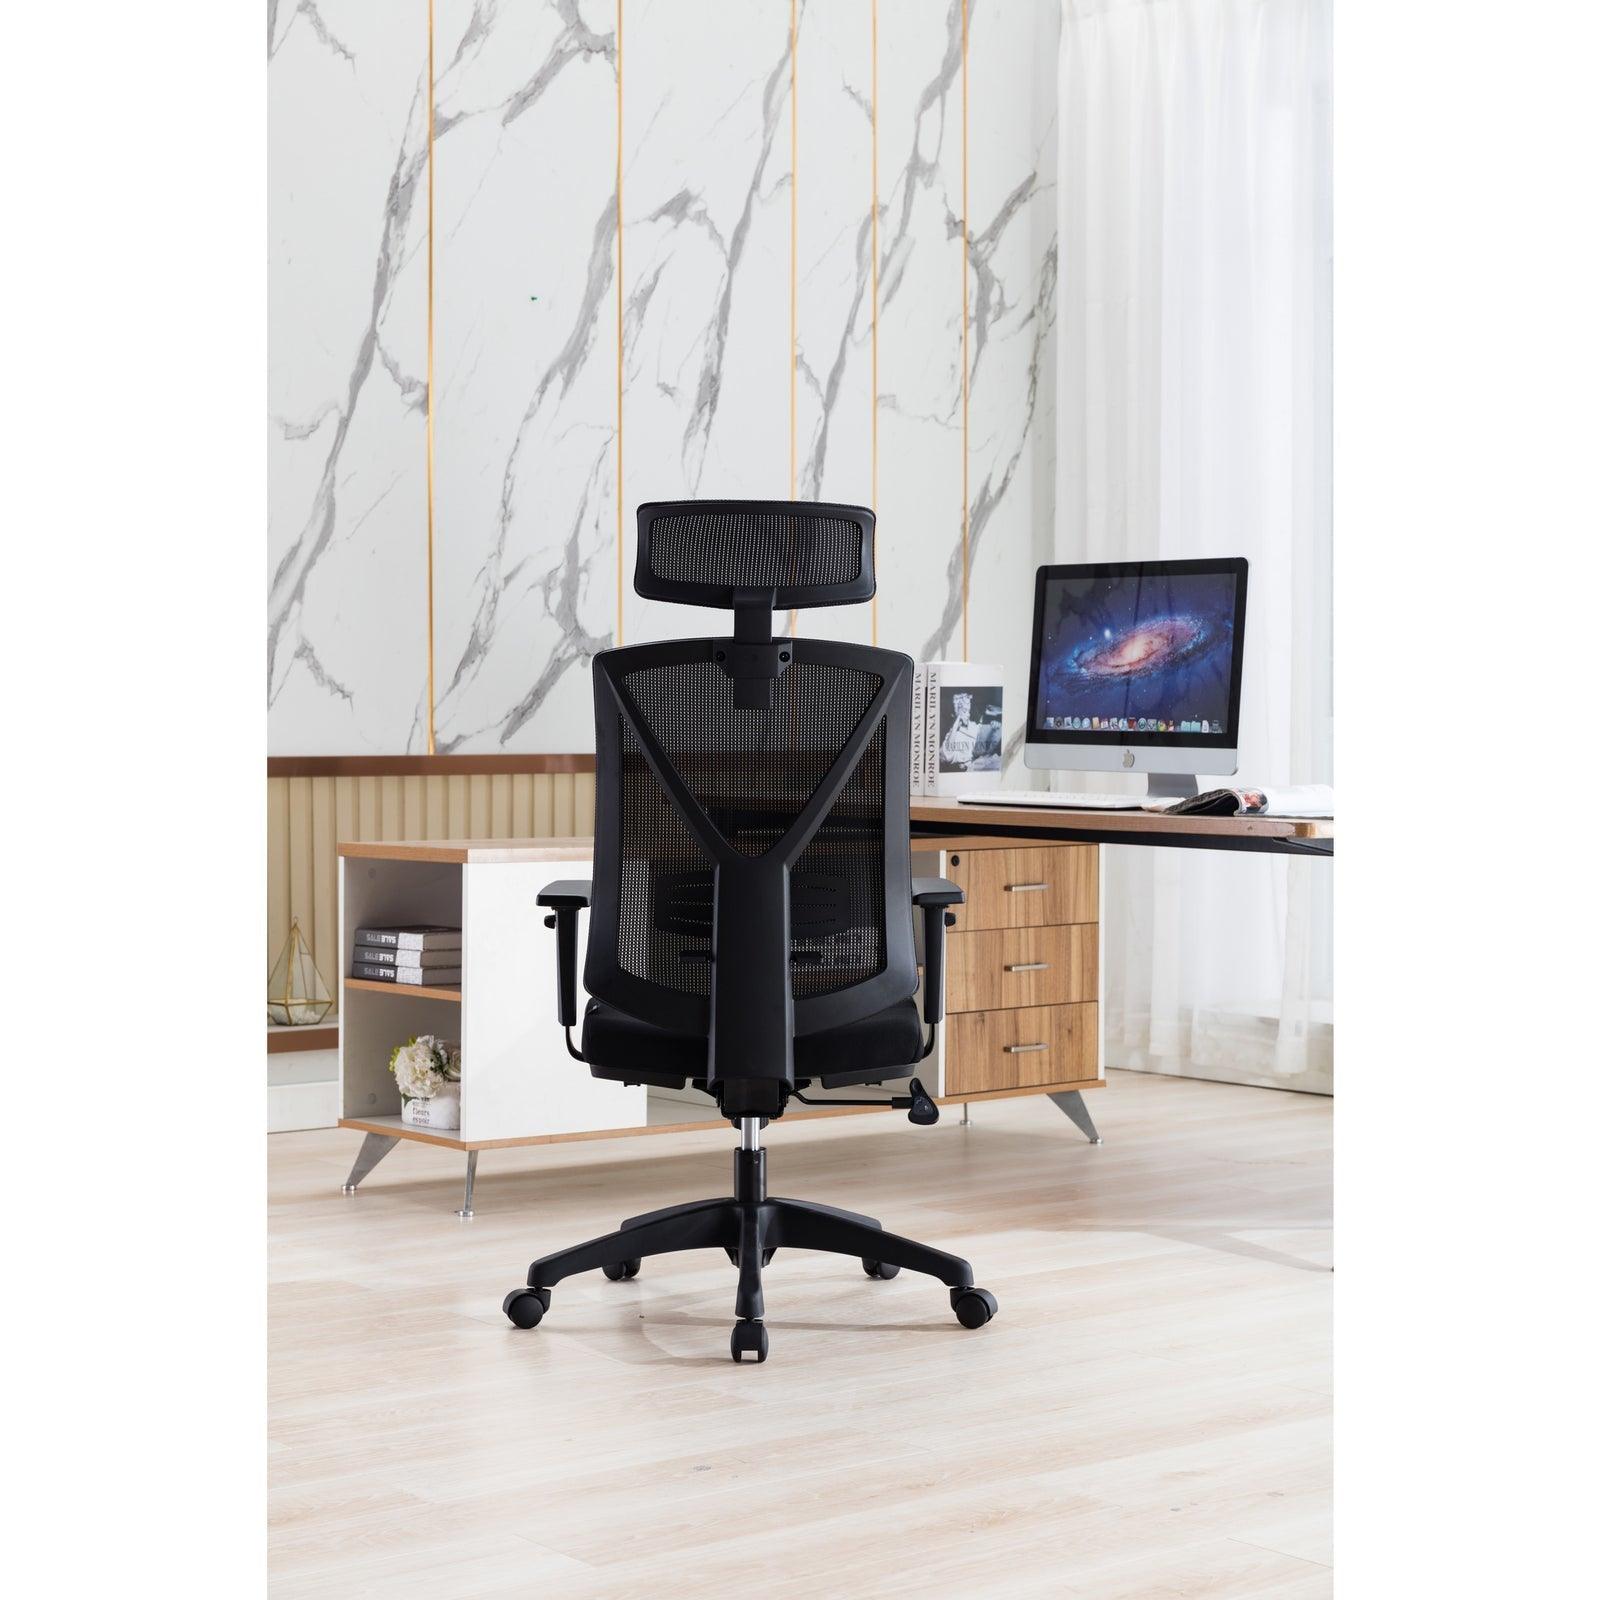 Mesh Ergonomic Office Chair with Headrest - Black - Office/Gaming ChairsOC8256-UN 4